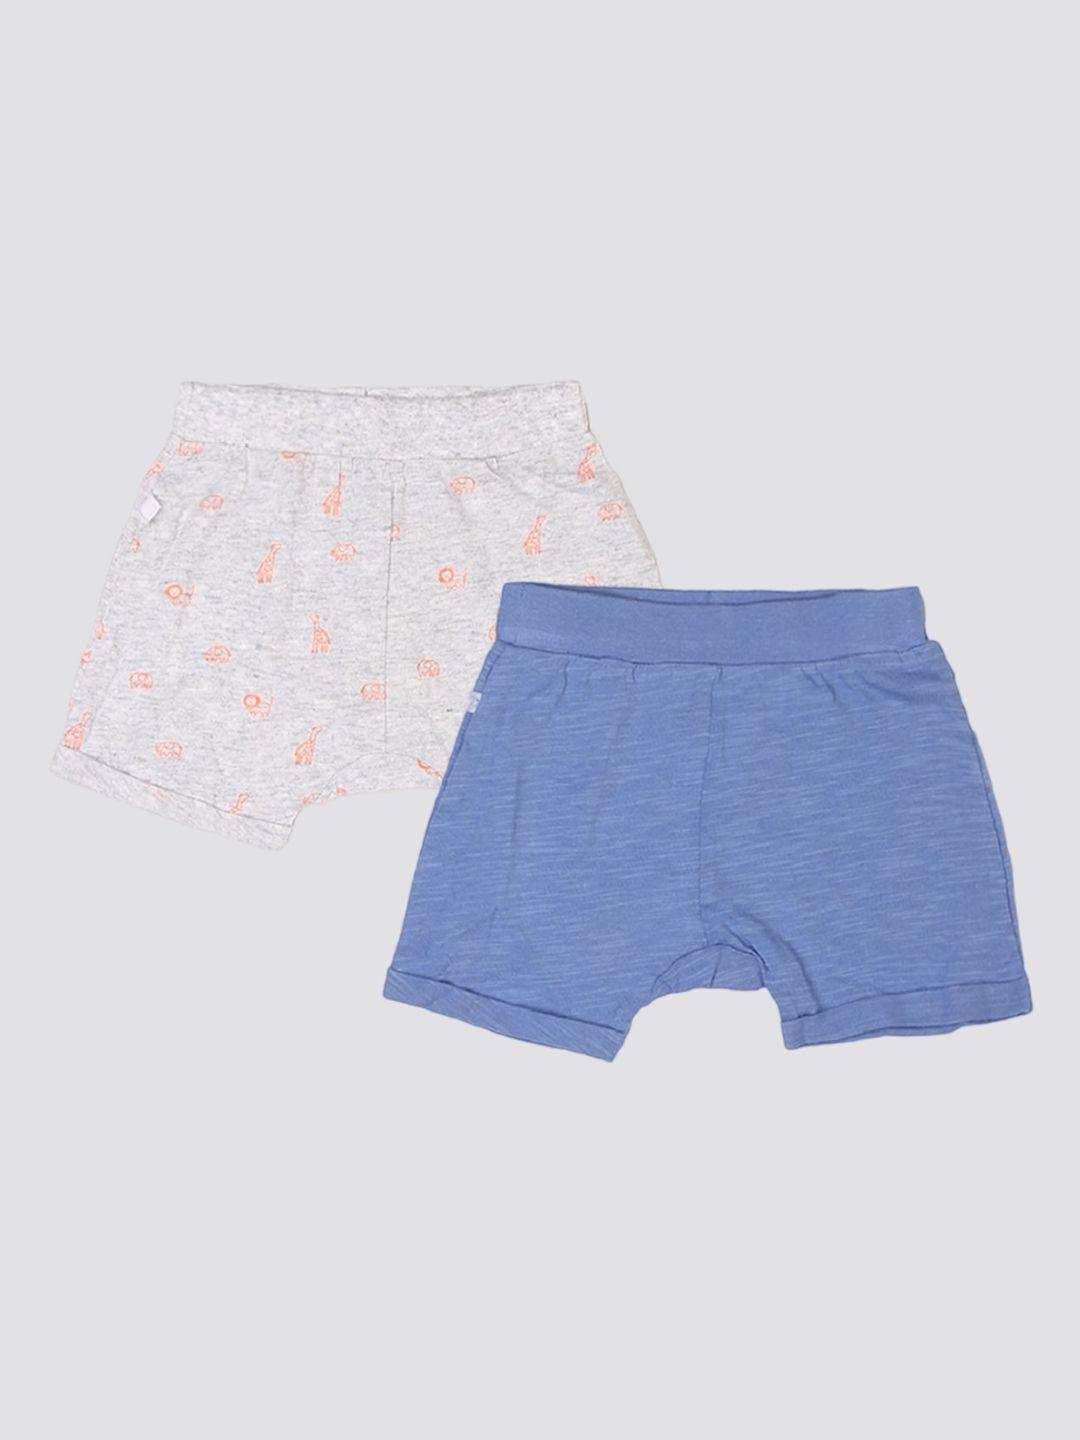 mothercare unisex kids pack of 2  floral printed shorts